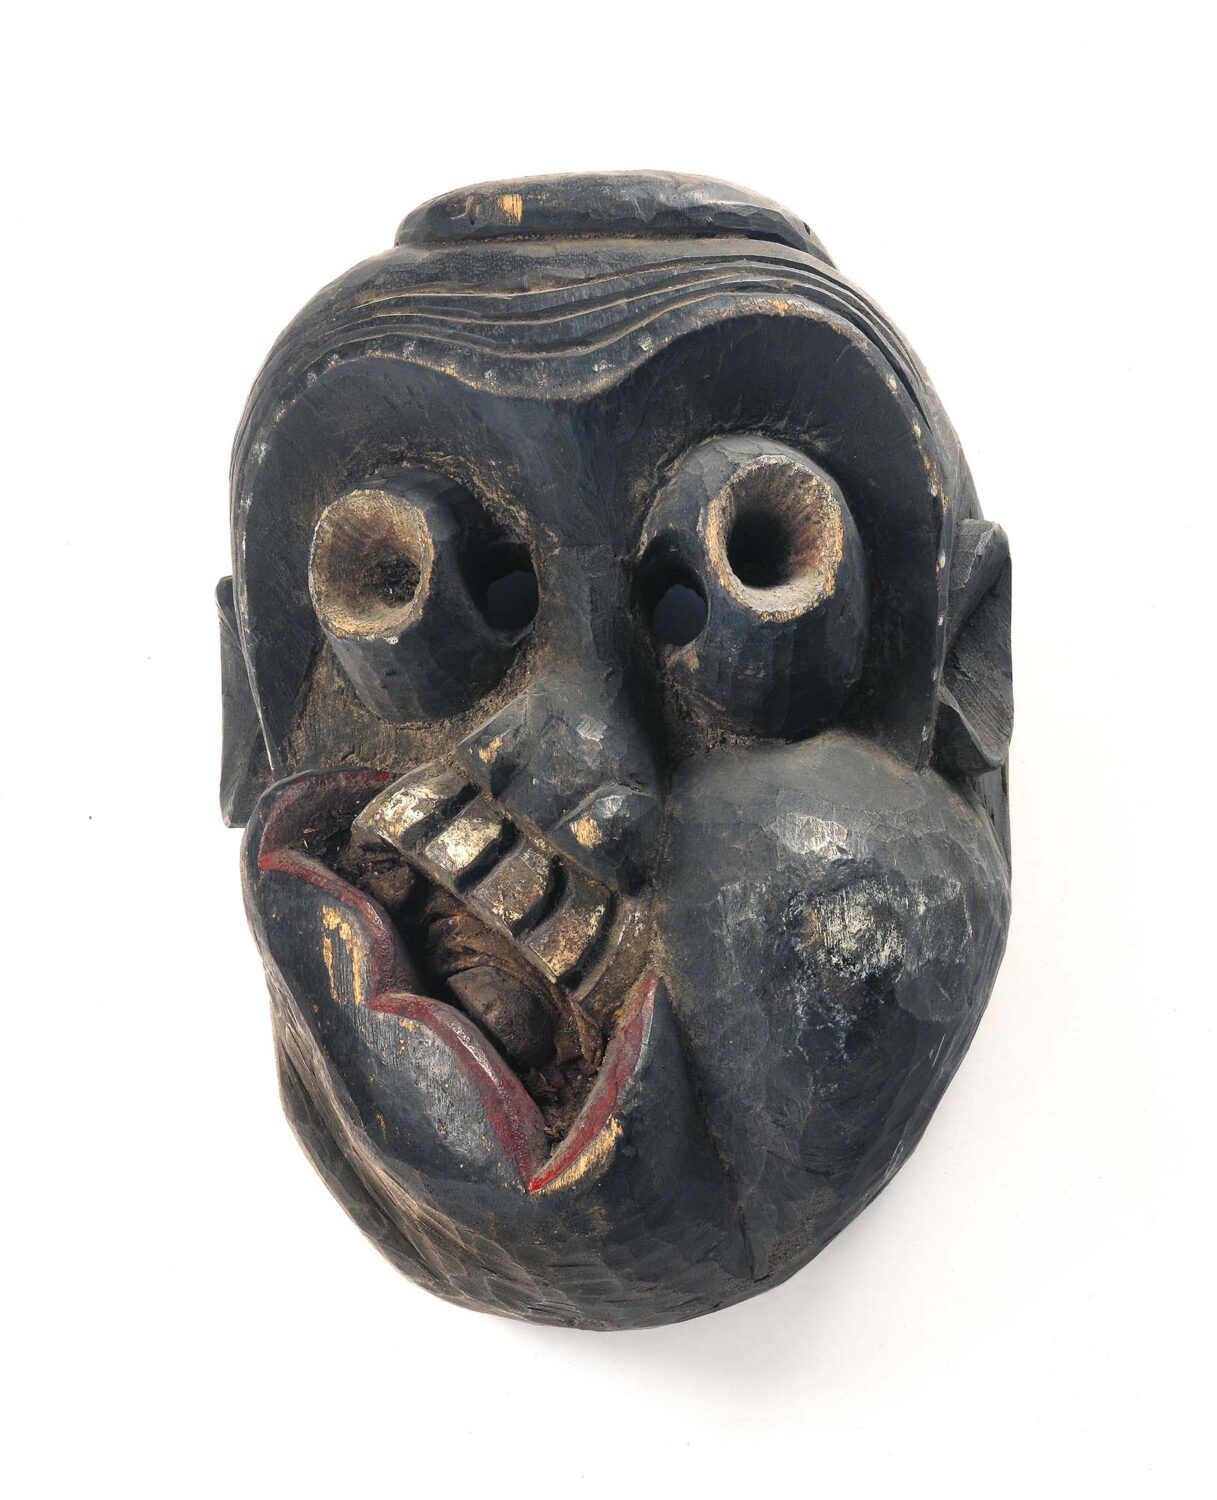 thumbnail of Okoroshi Ojo mask with skewed features.